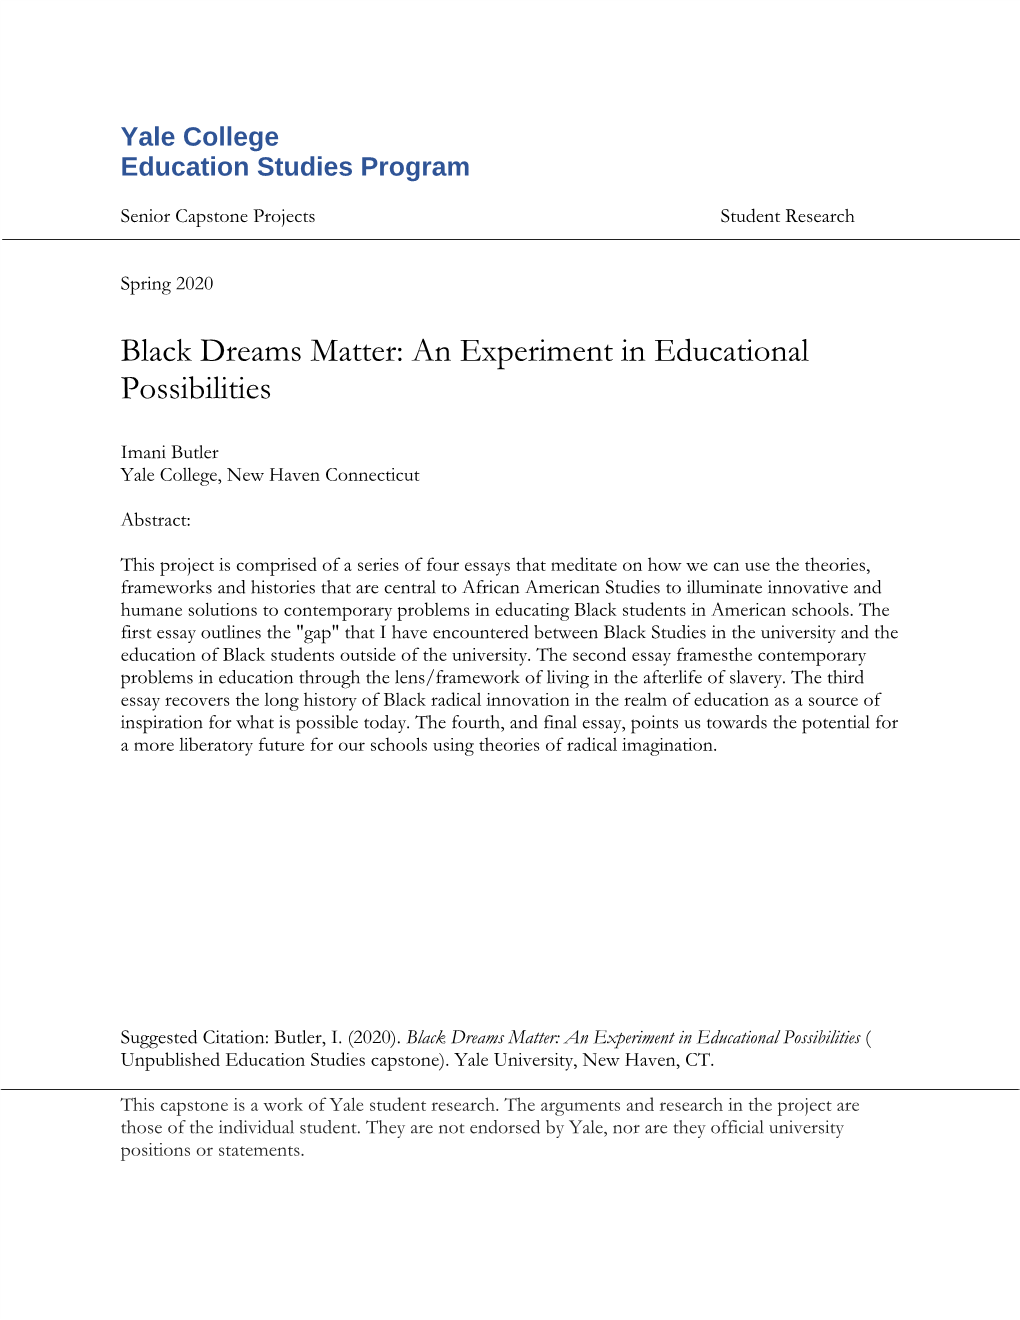 Black Dreams Matter: an Experiment in Educational Possibilities